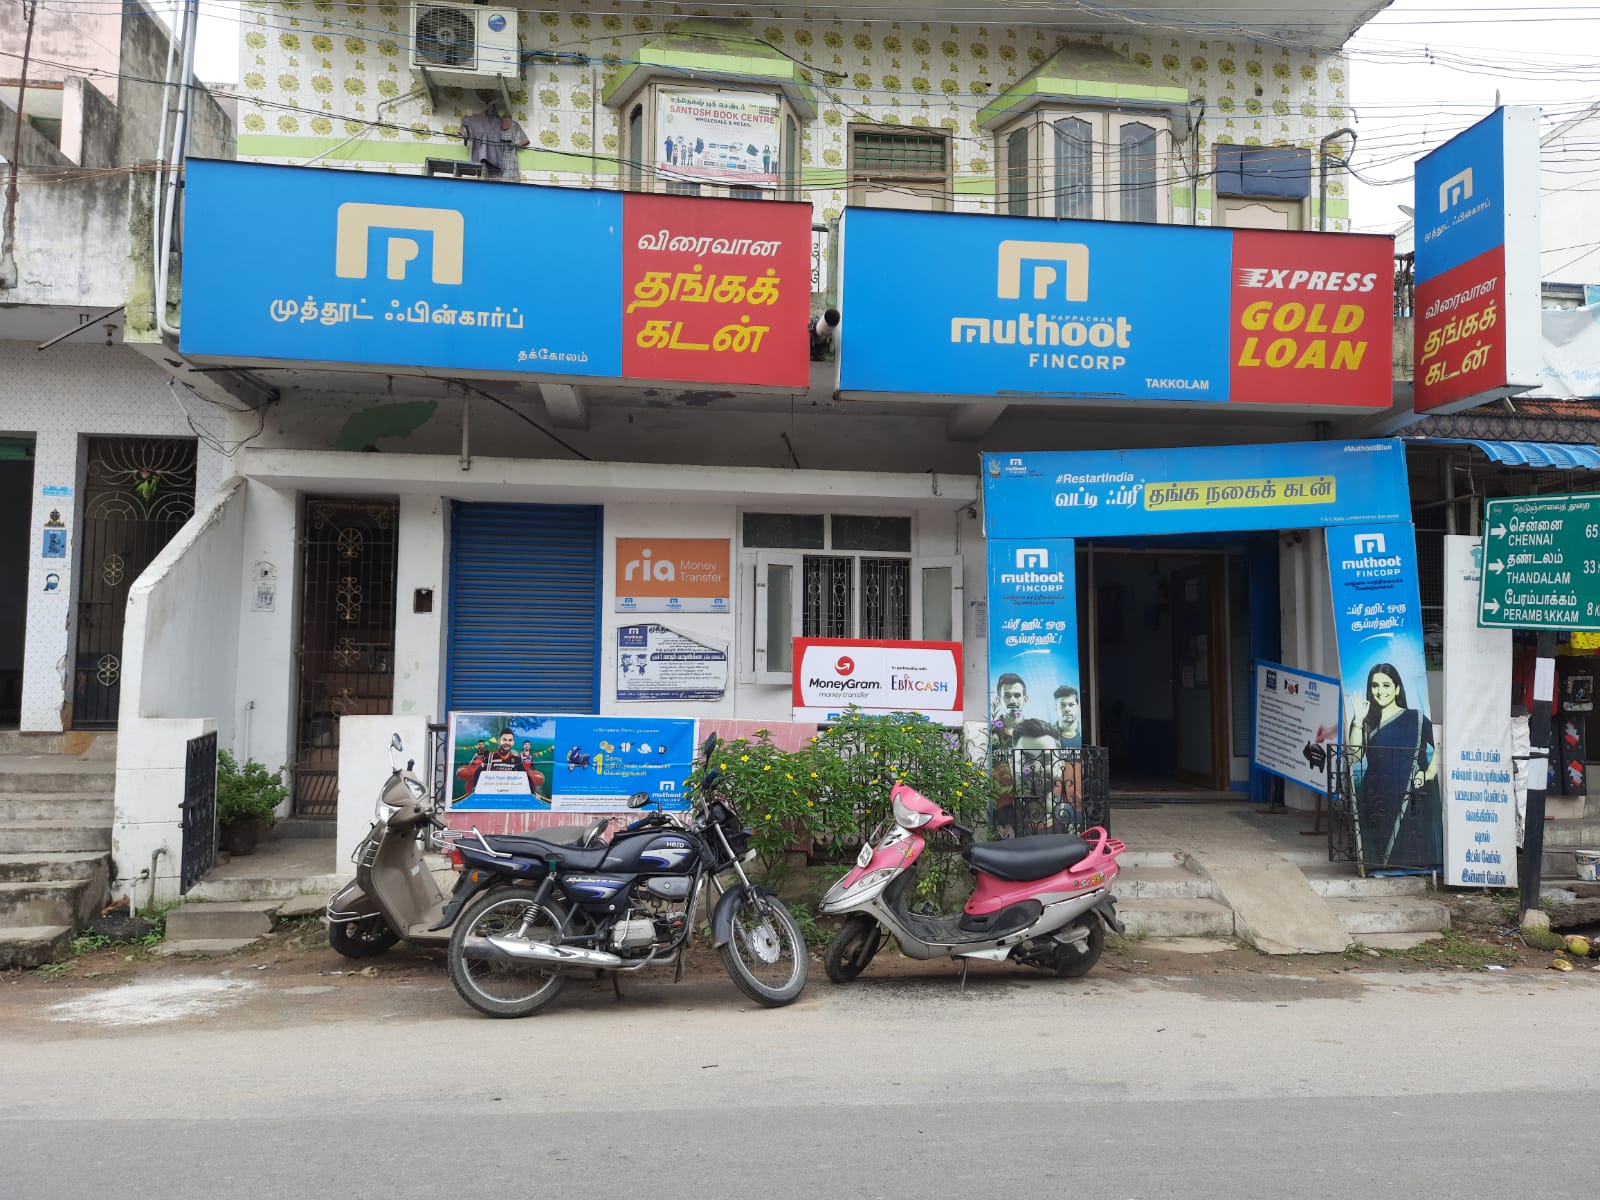 Photos and Videos of Muthoot Fincorp Gold Loan in Takkolam, Vellore